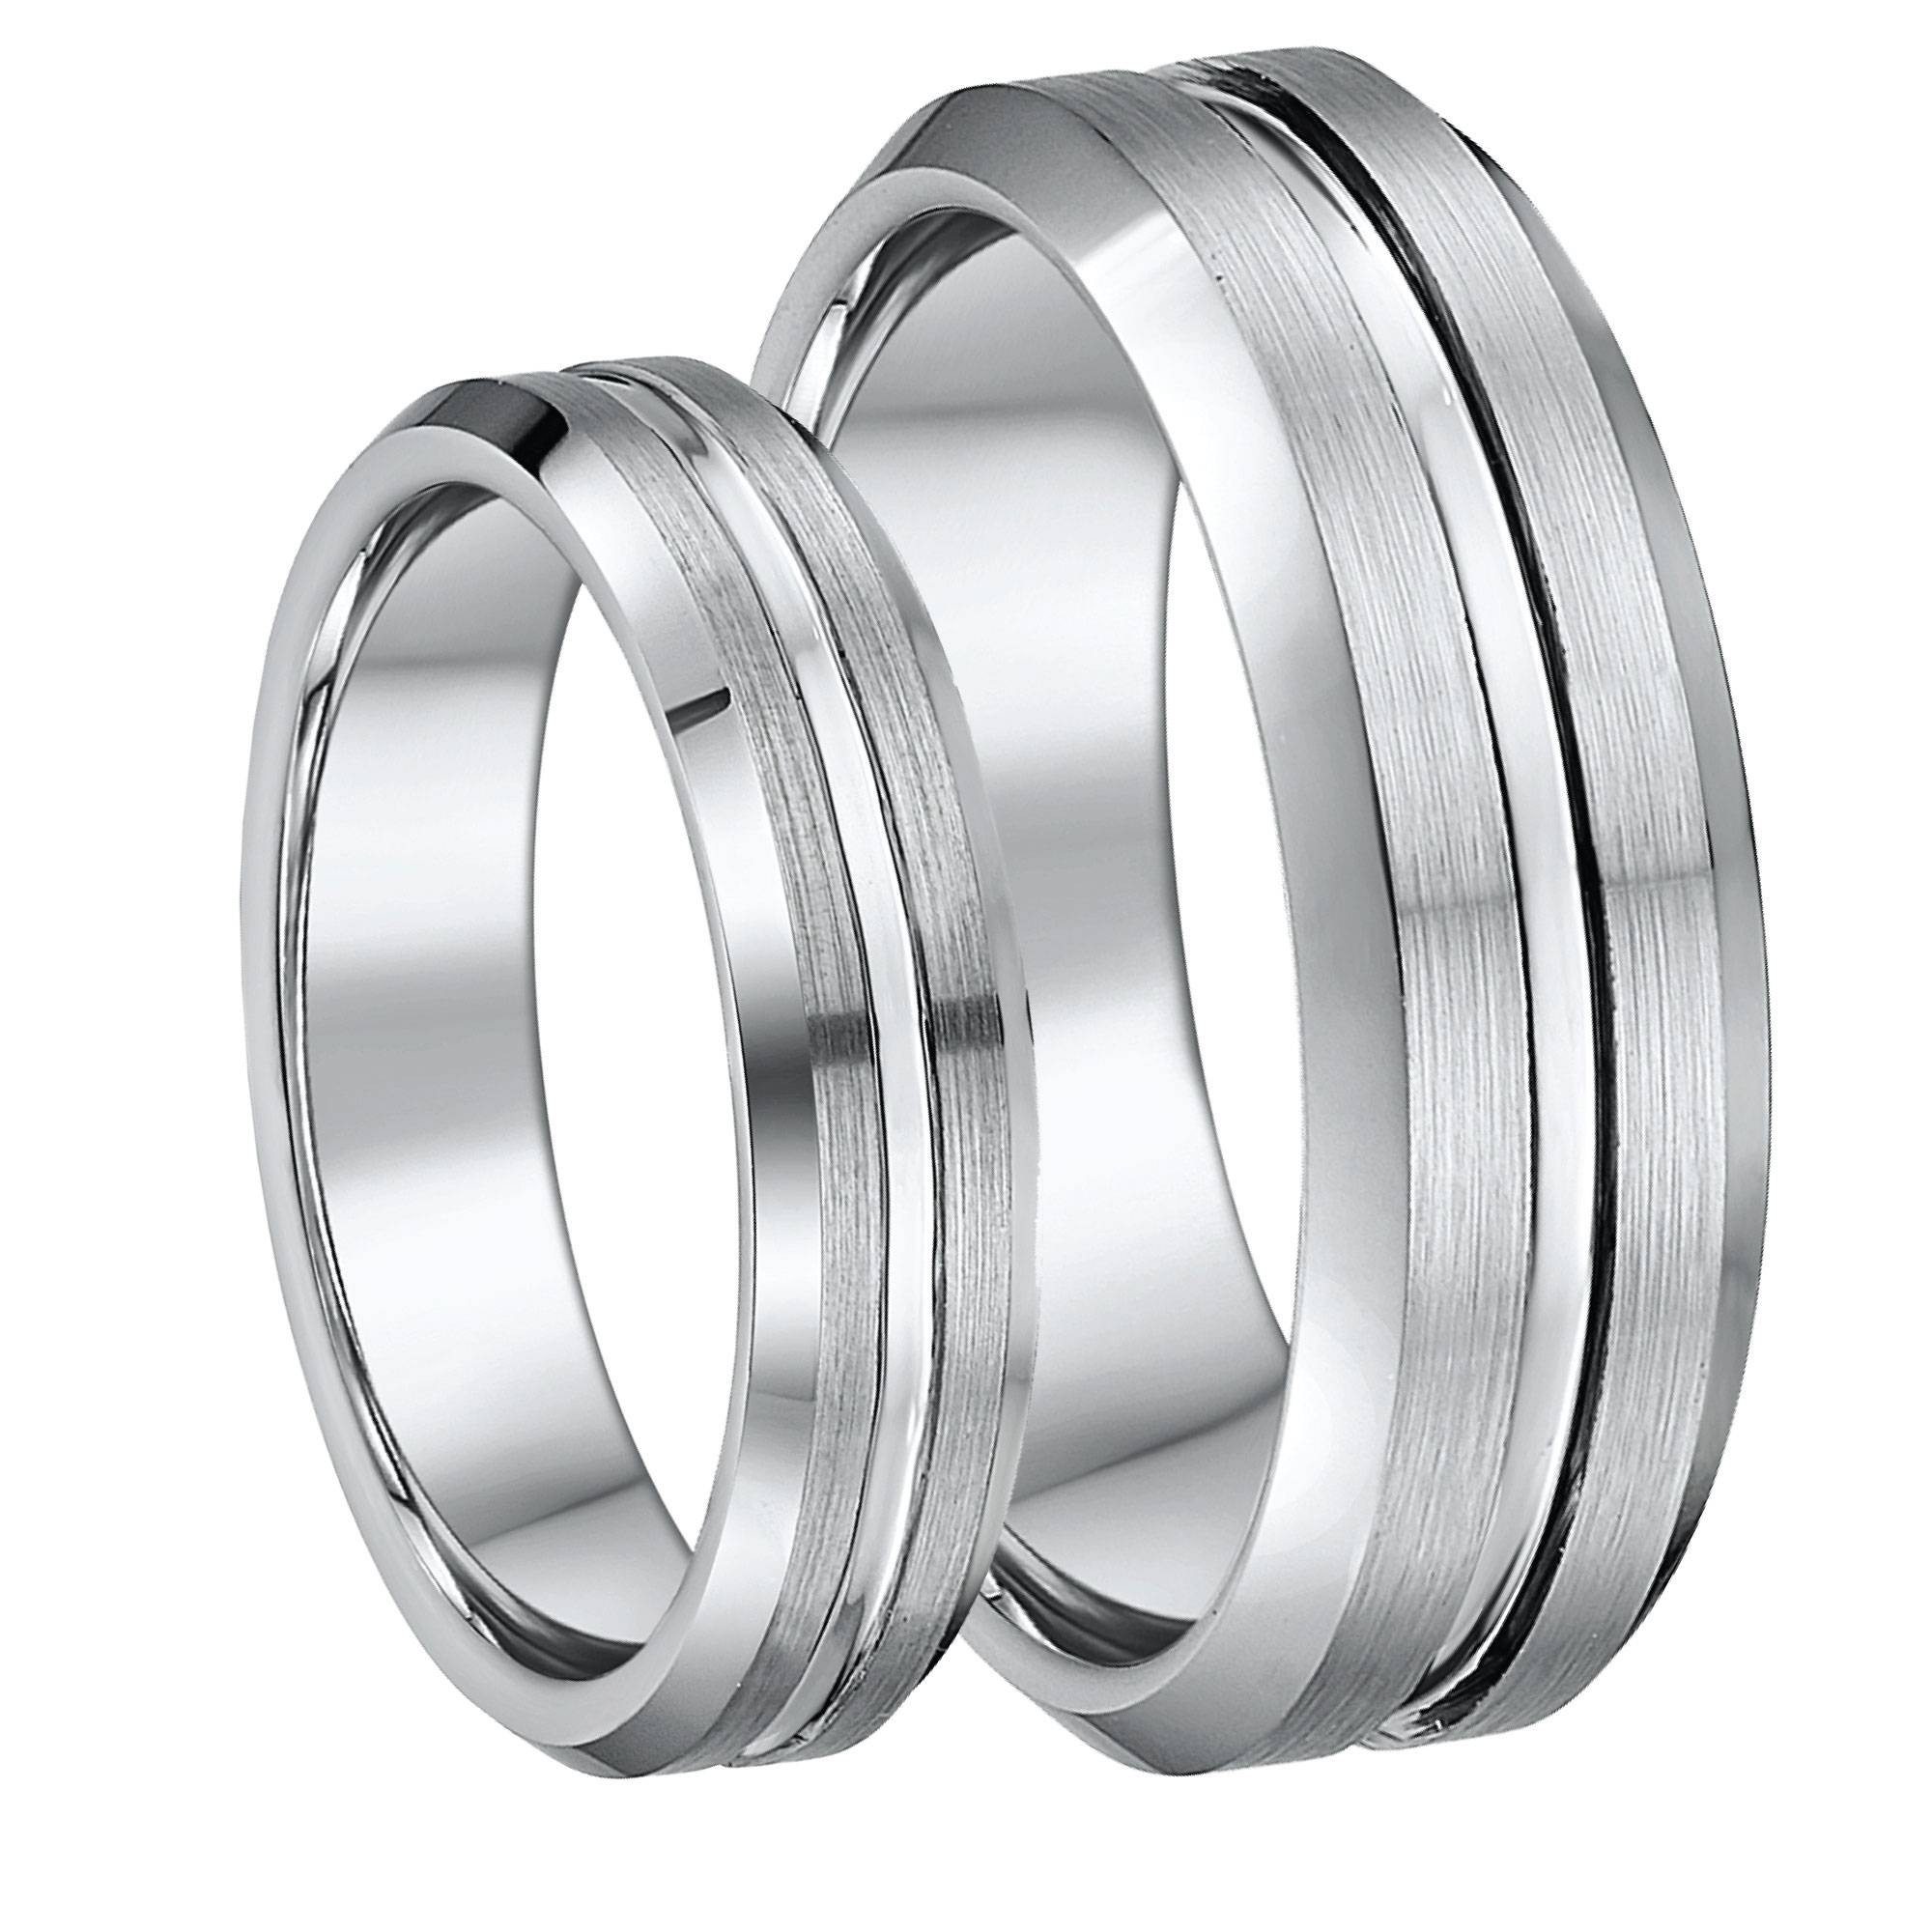 Tungsten Wedding Band Sets
 2019 Latest Tungsten Wedding Bands Sets His And Hers